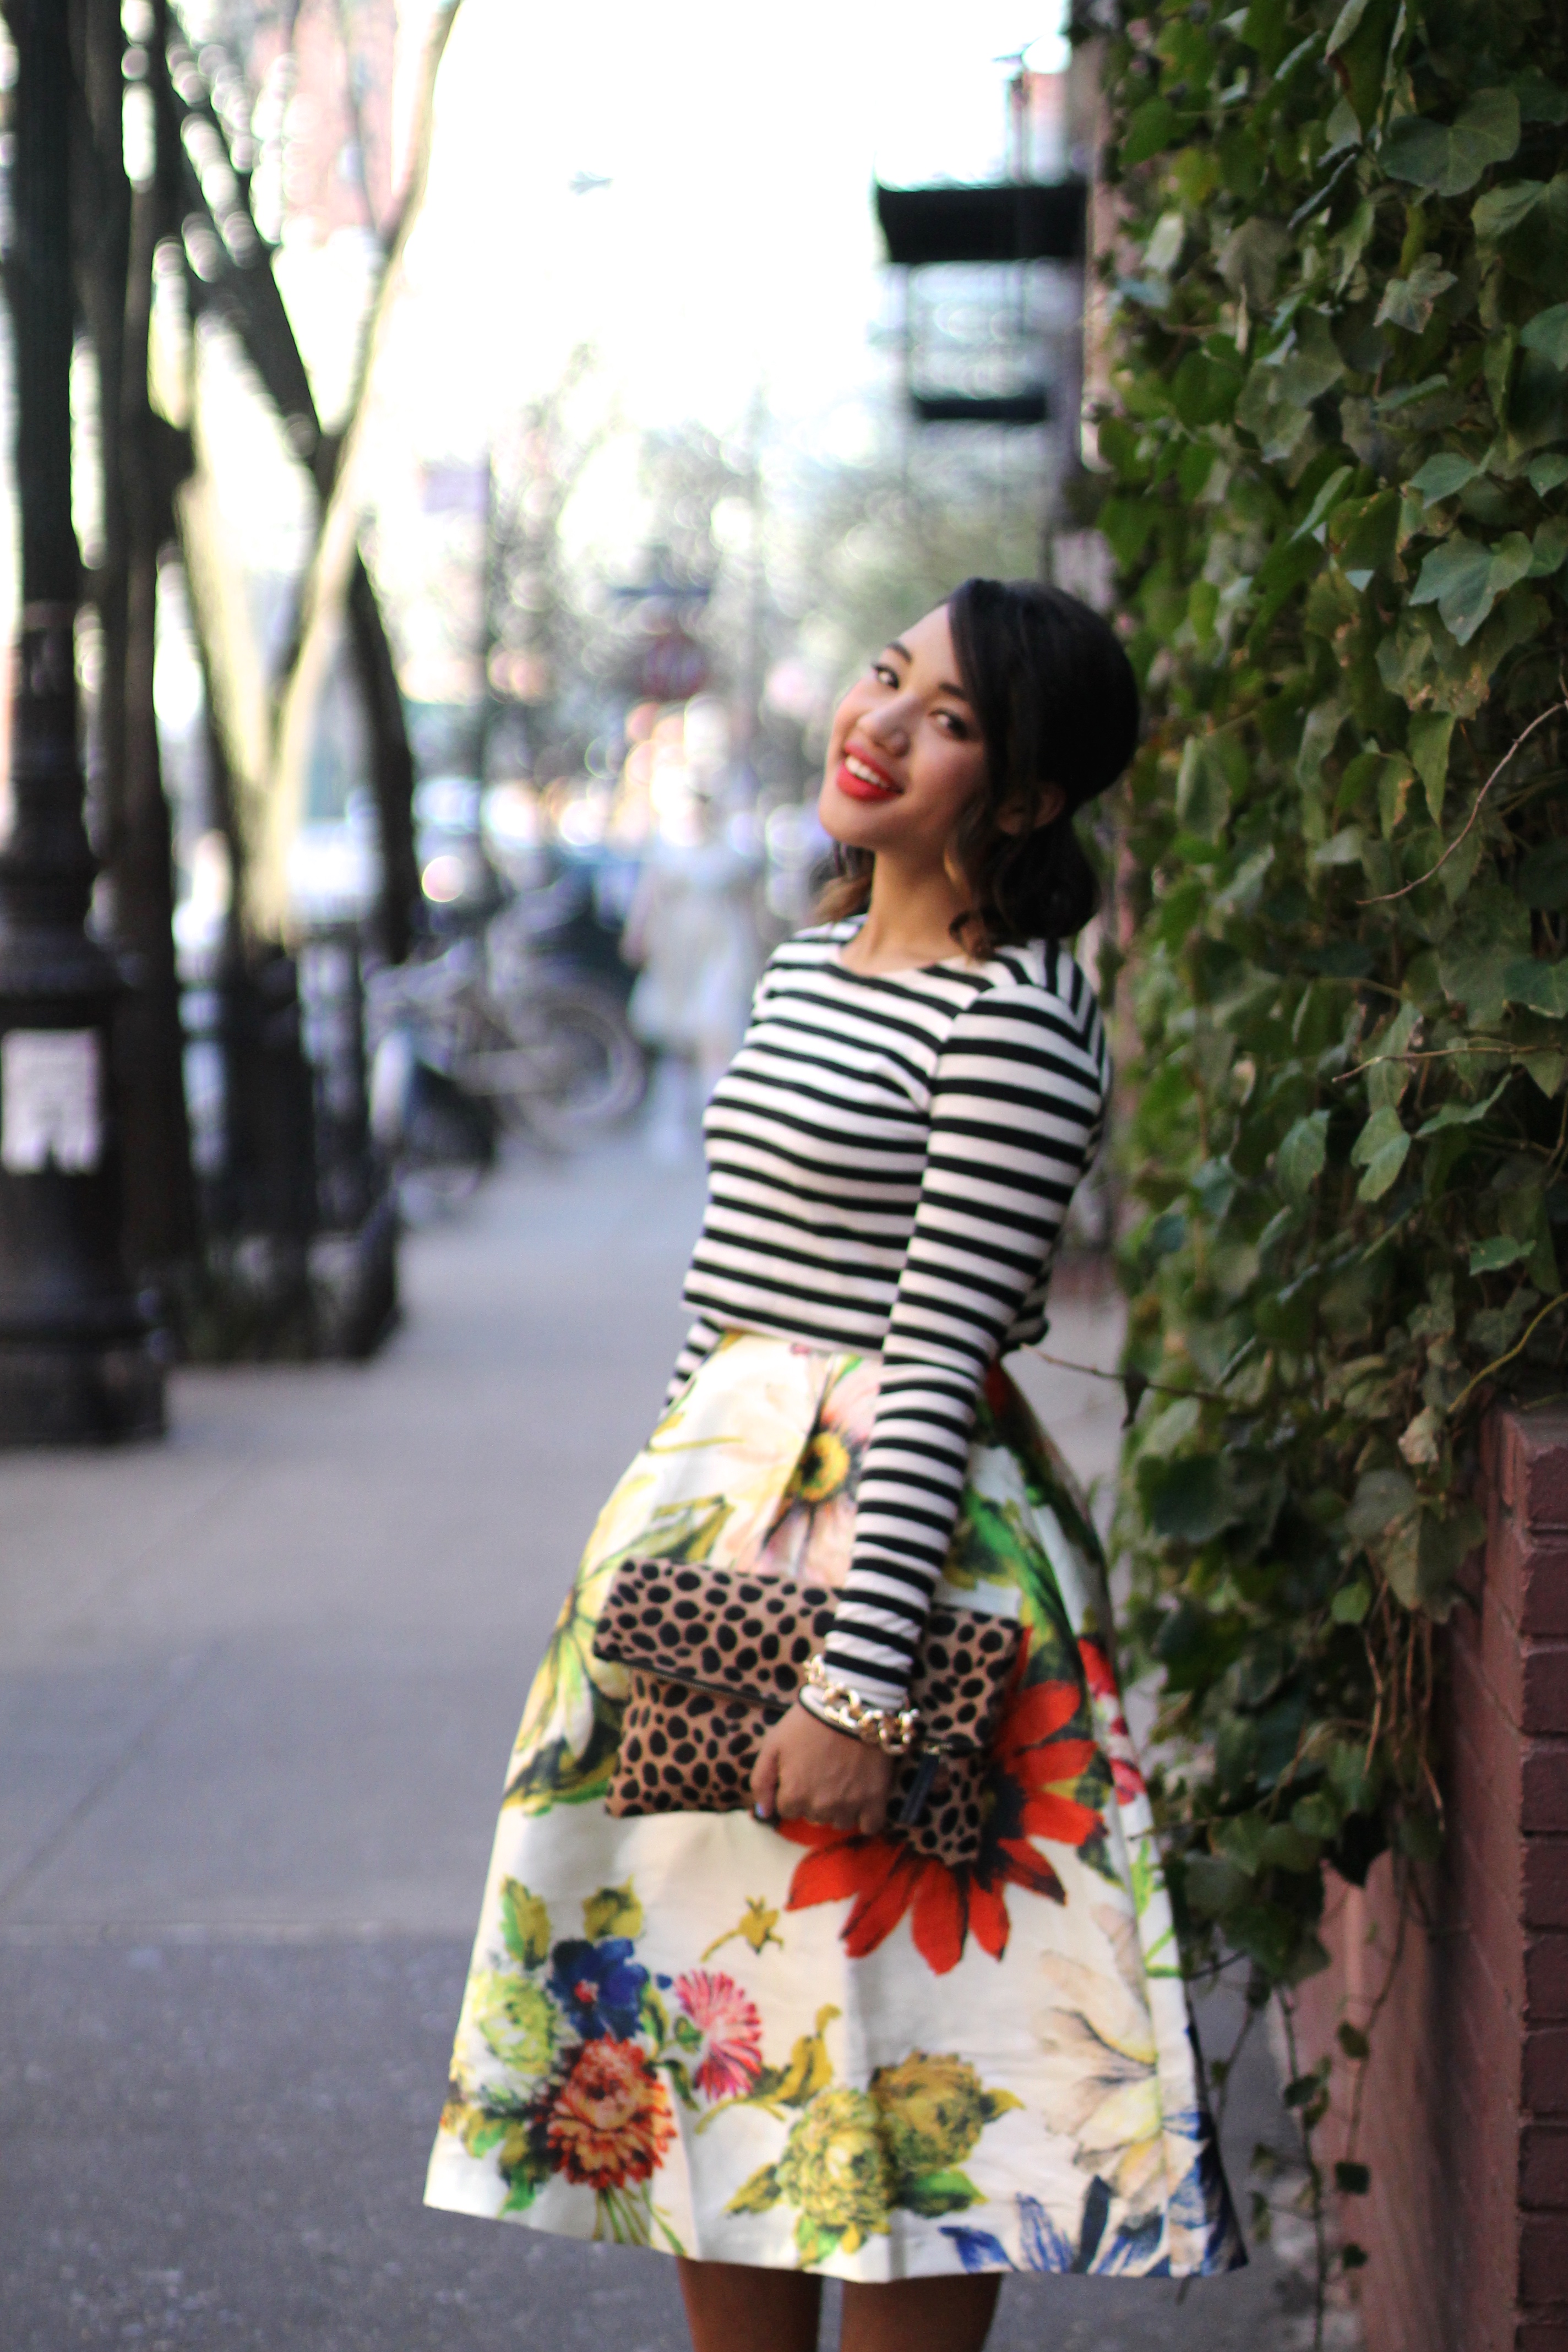 striped floral dress stripe and floral how to mix patterns pattern mixing blogger missing prints print mixing stripes and floral stripes and flowers